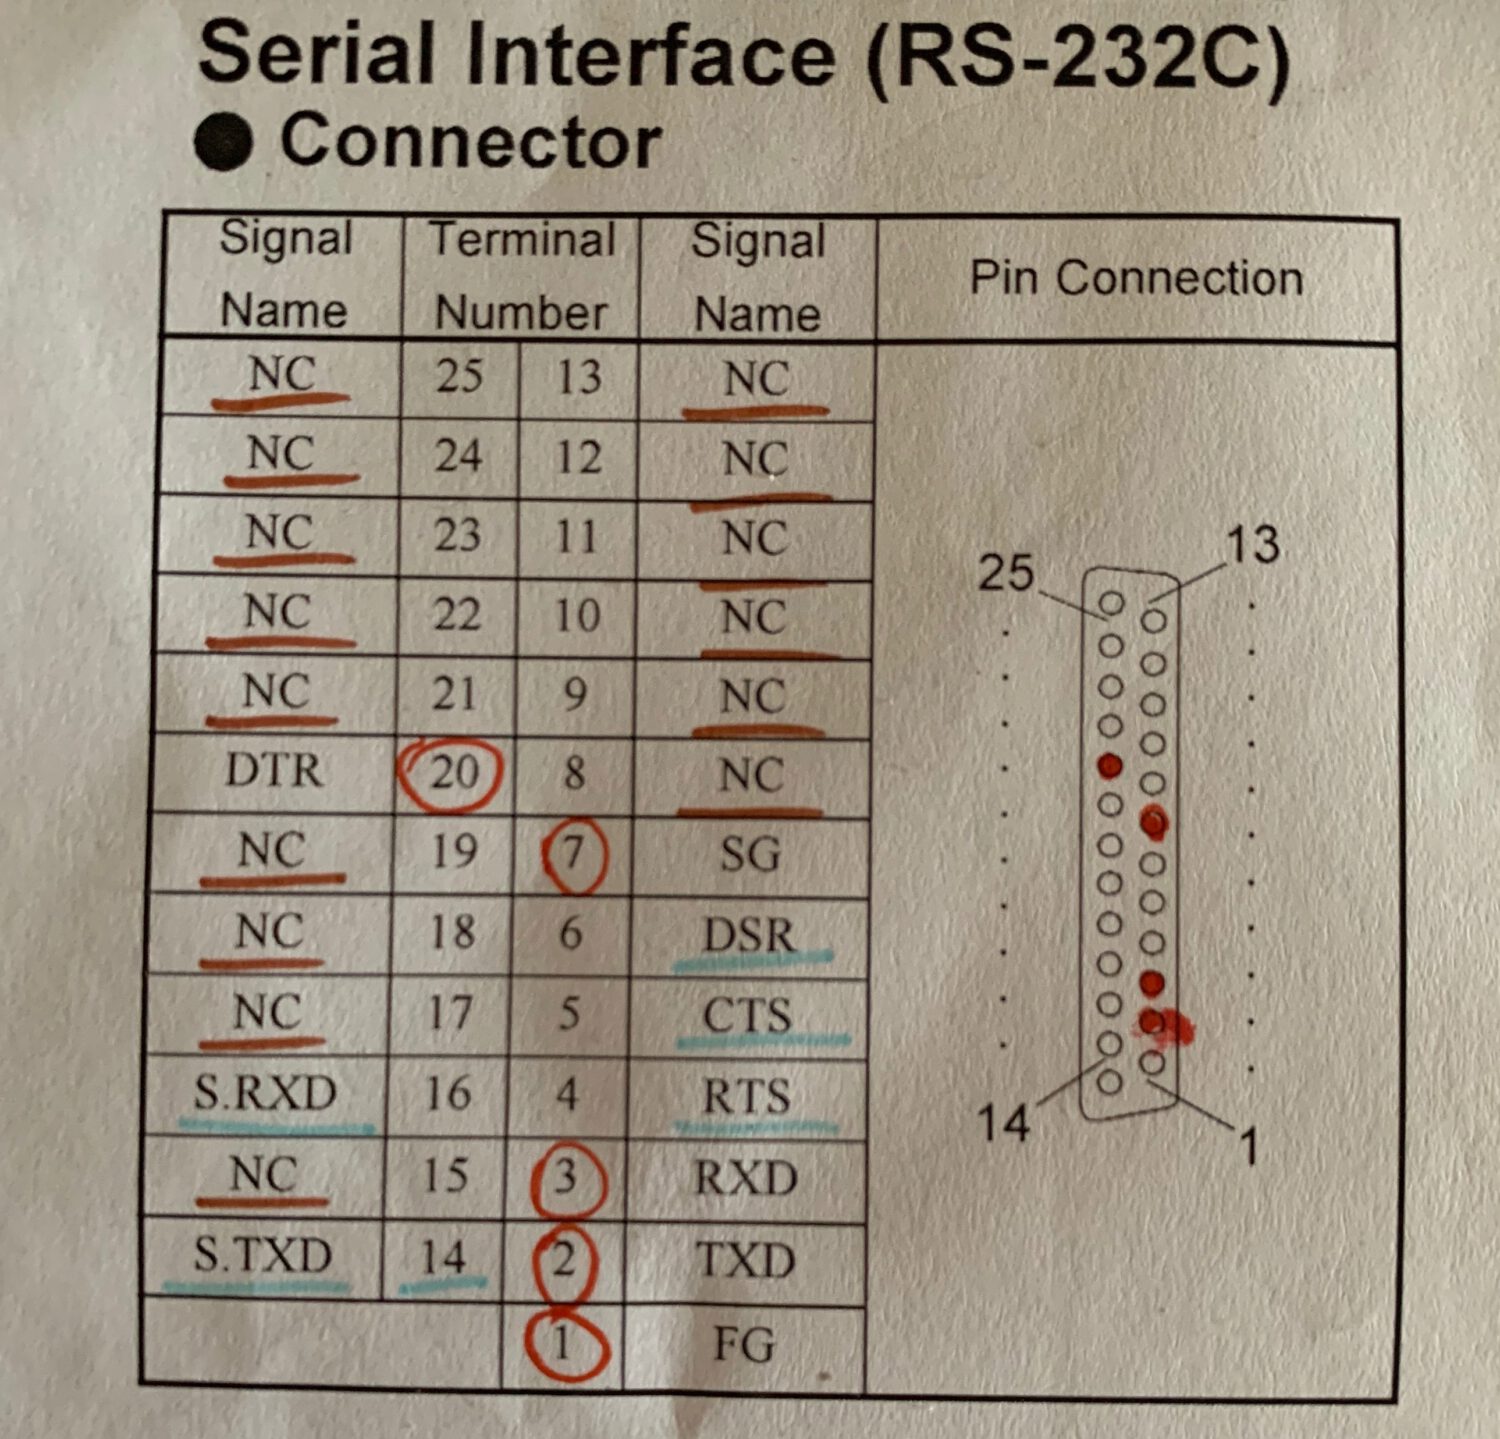 Roland's pinout chart as shown in the user manual